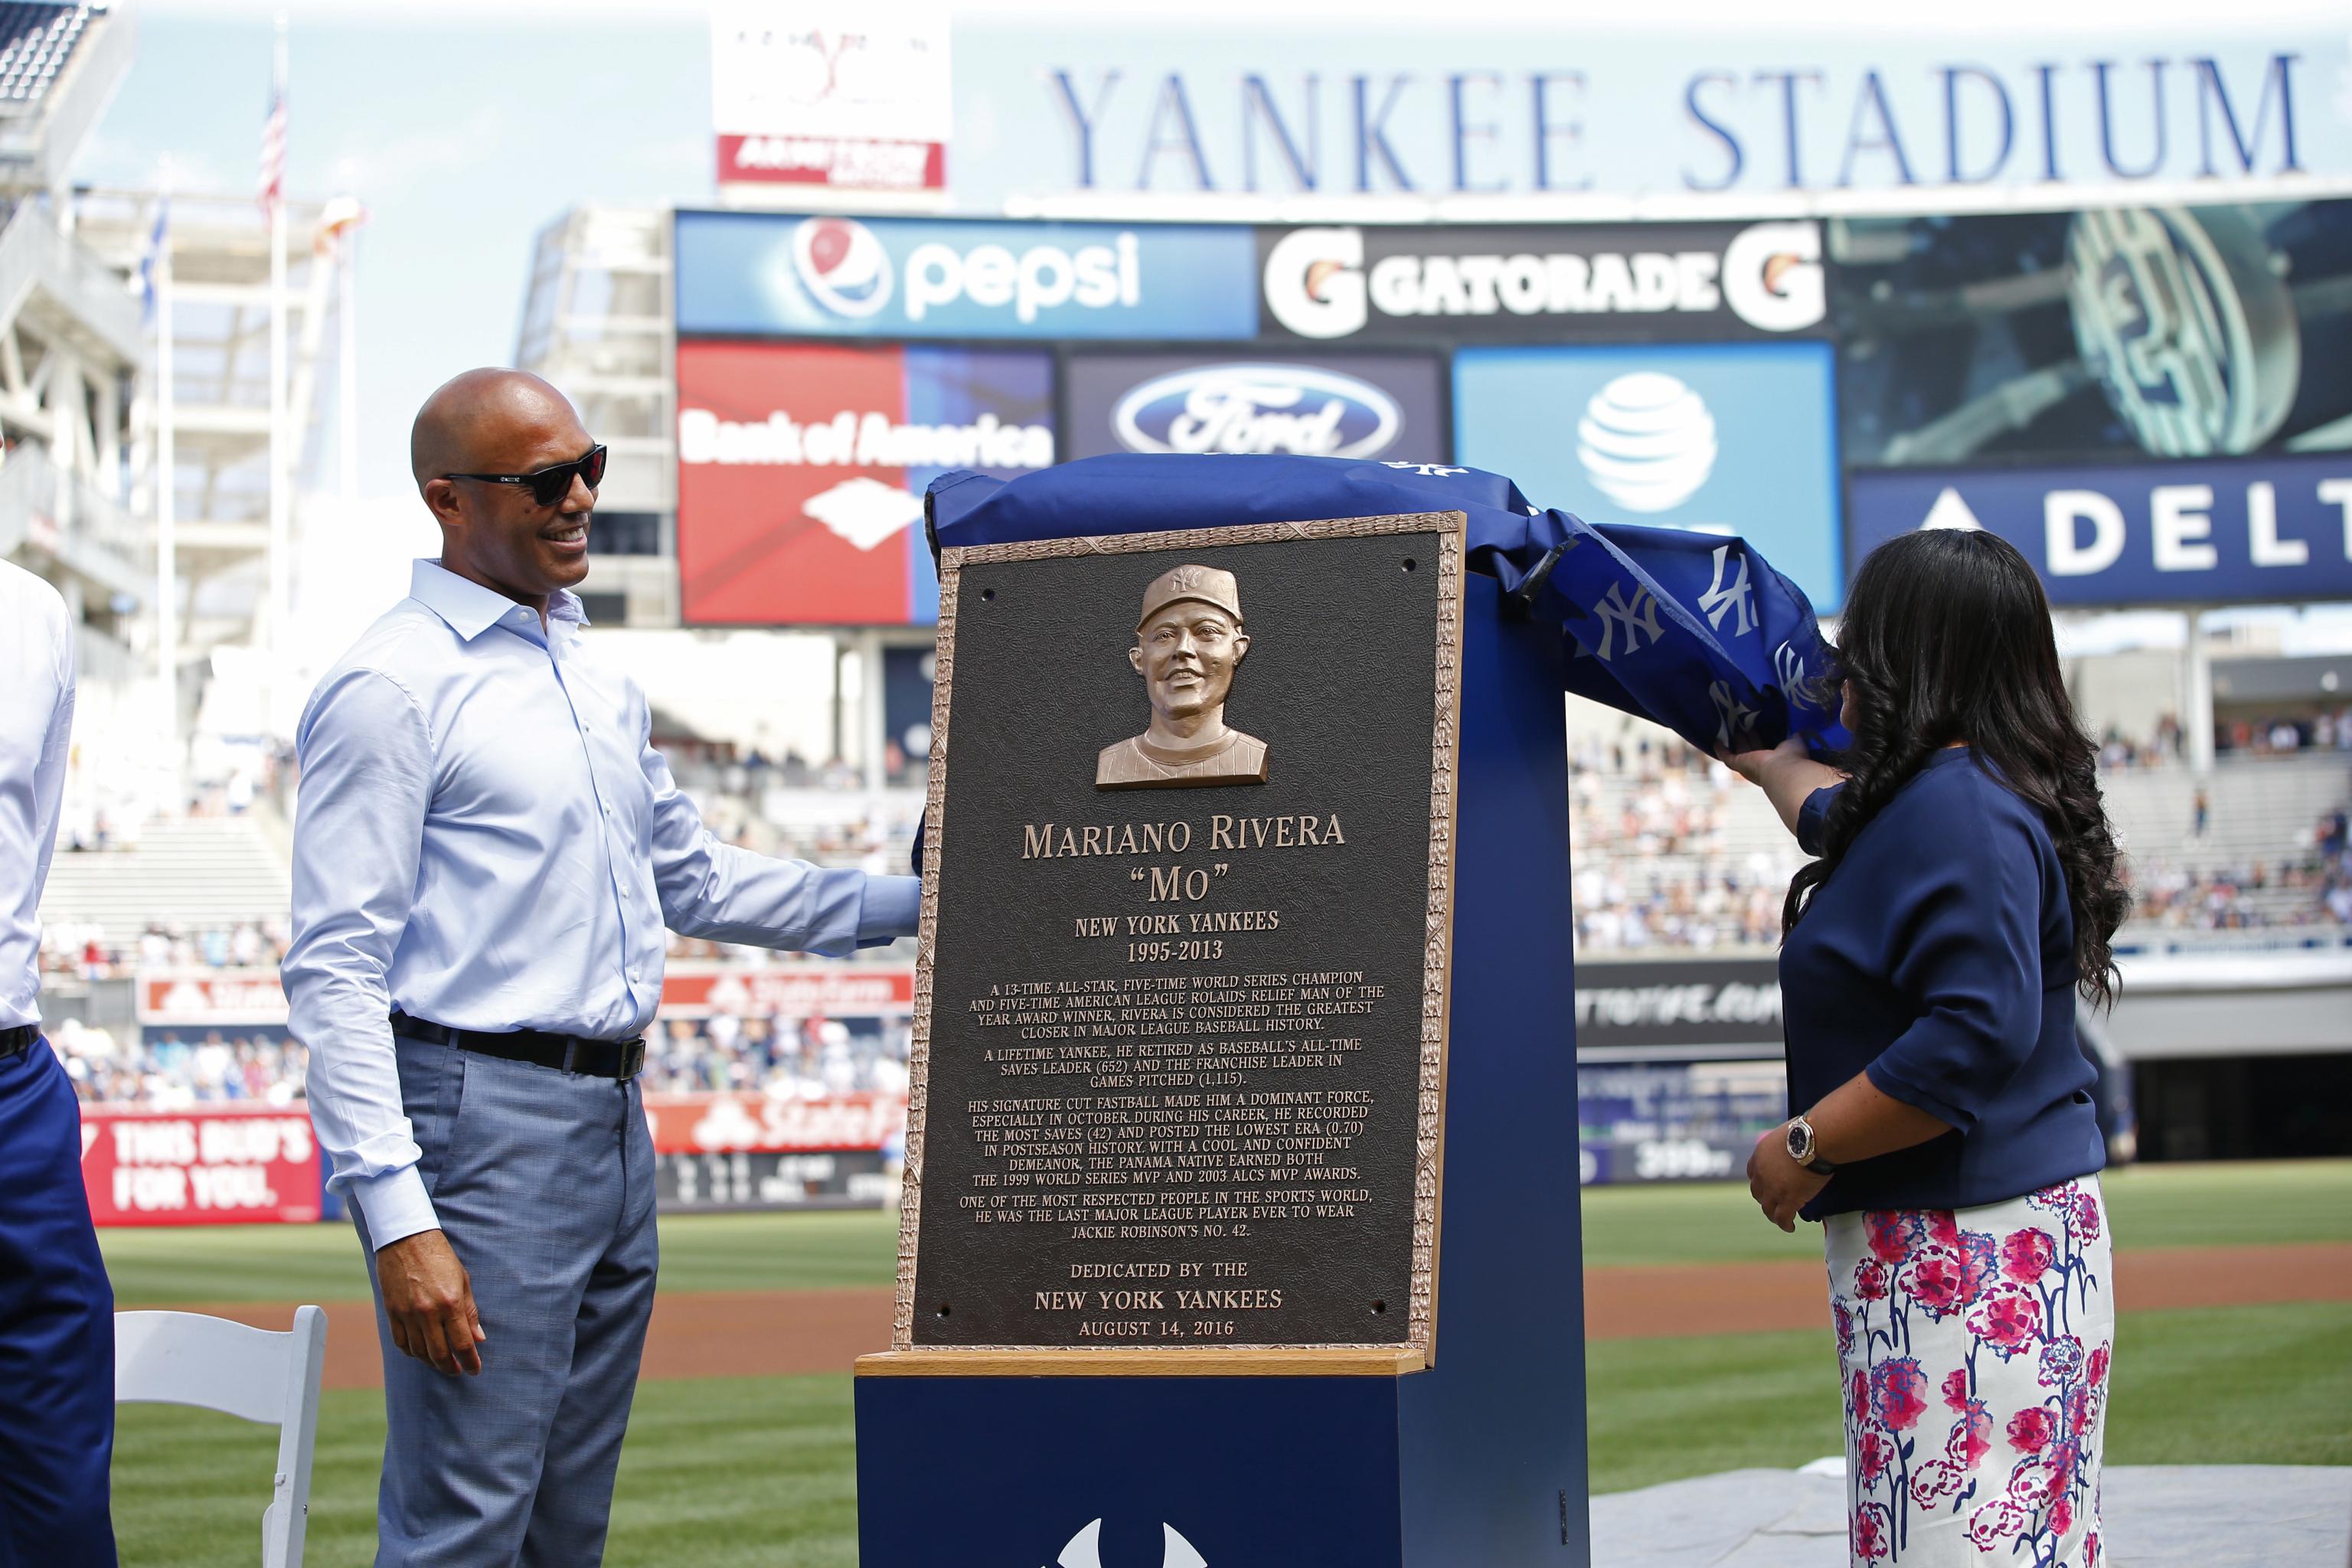 A unanimous Hall of Fame election for Mariano Rivera? As one